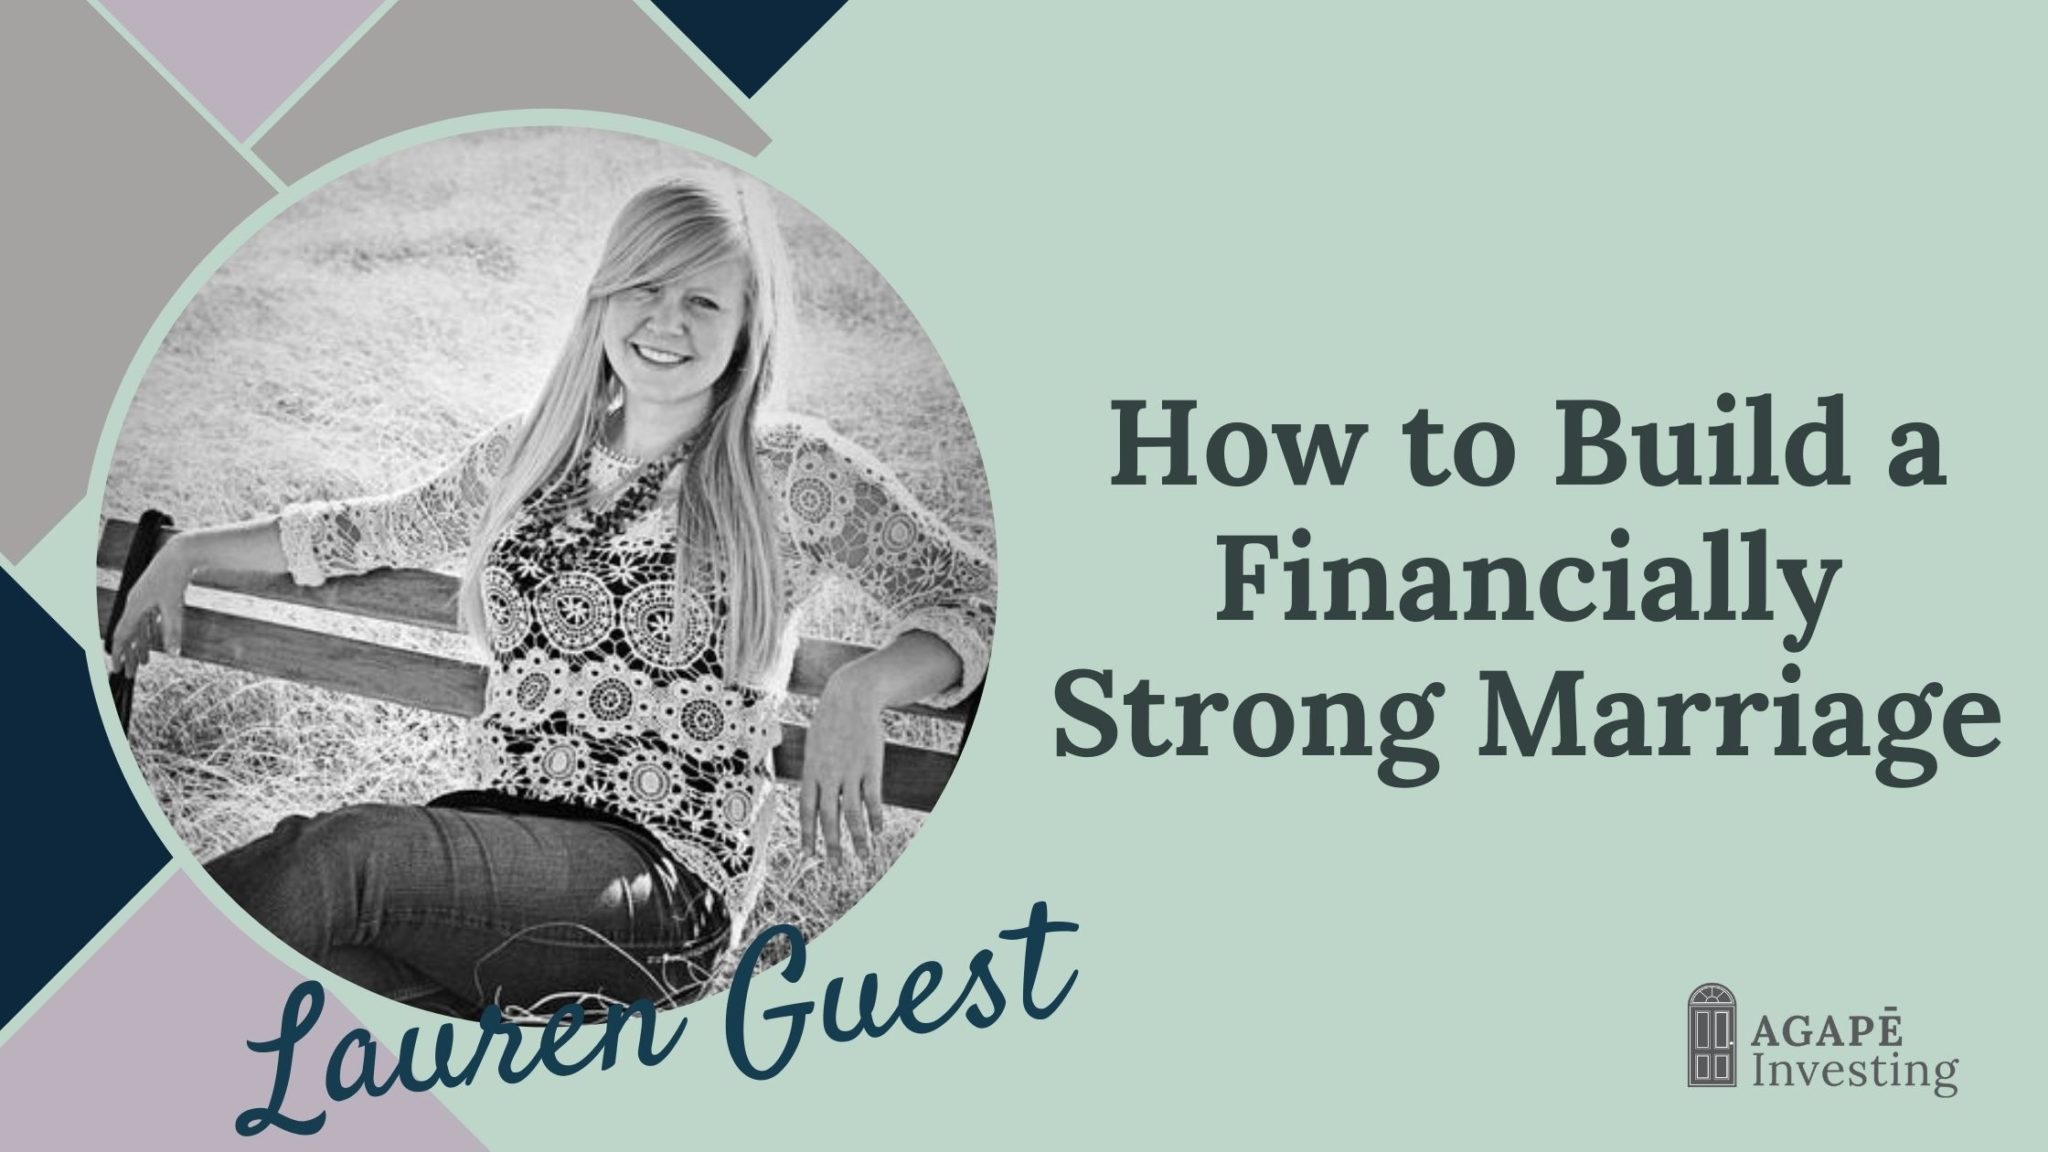 How to Build a Financially Strong Marriage - Lauren Guest